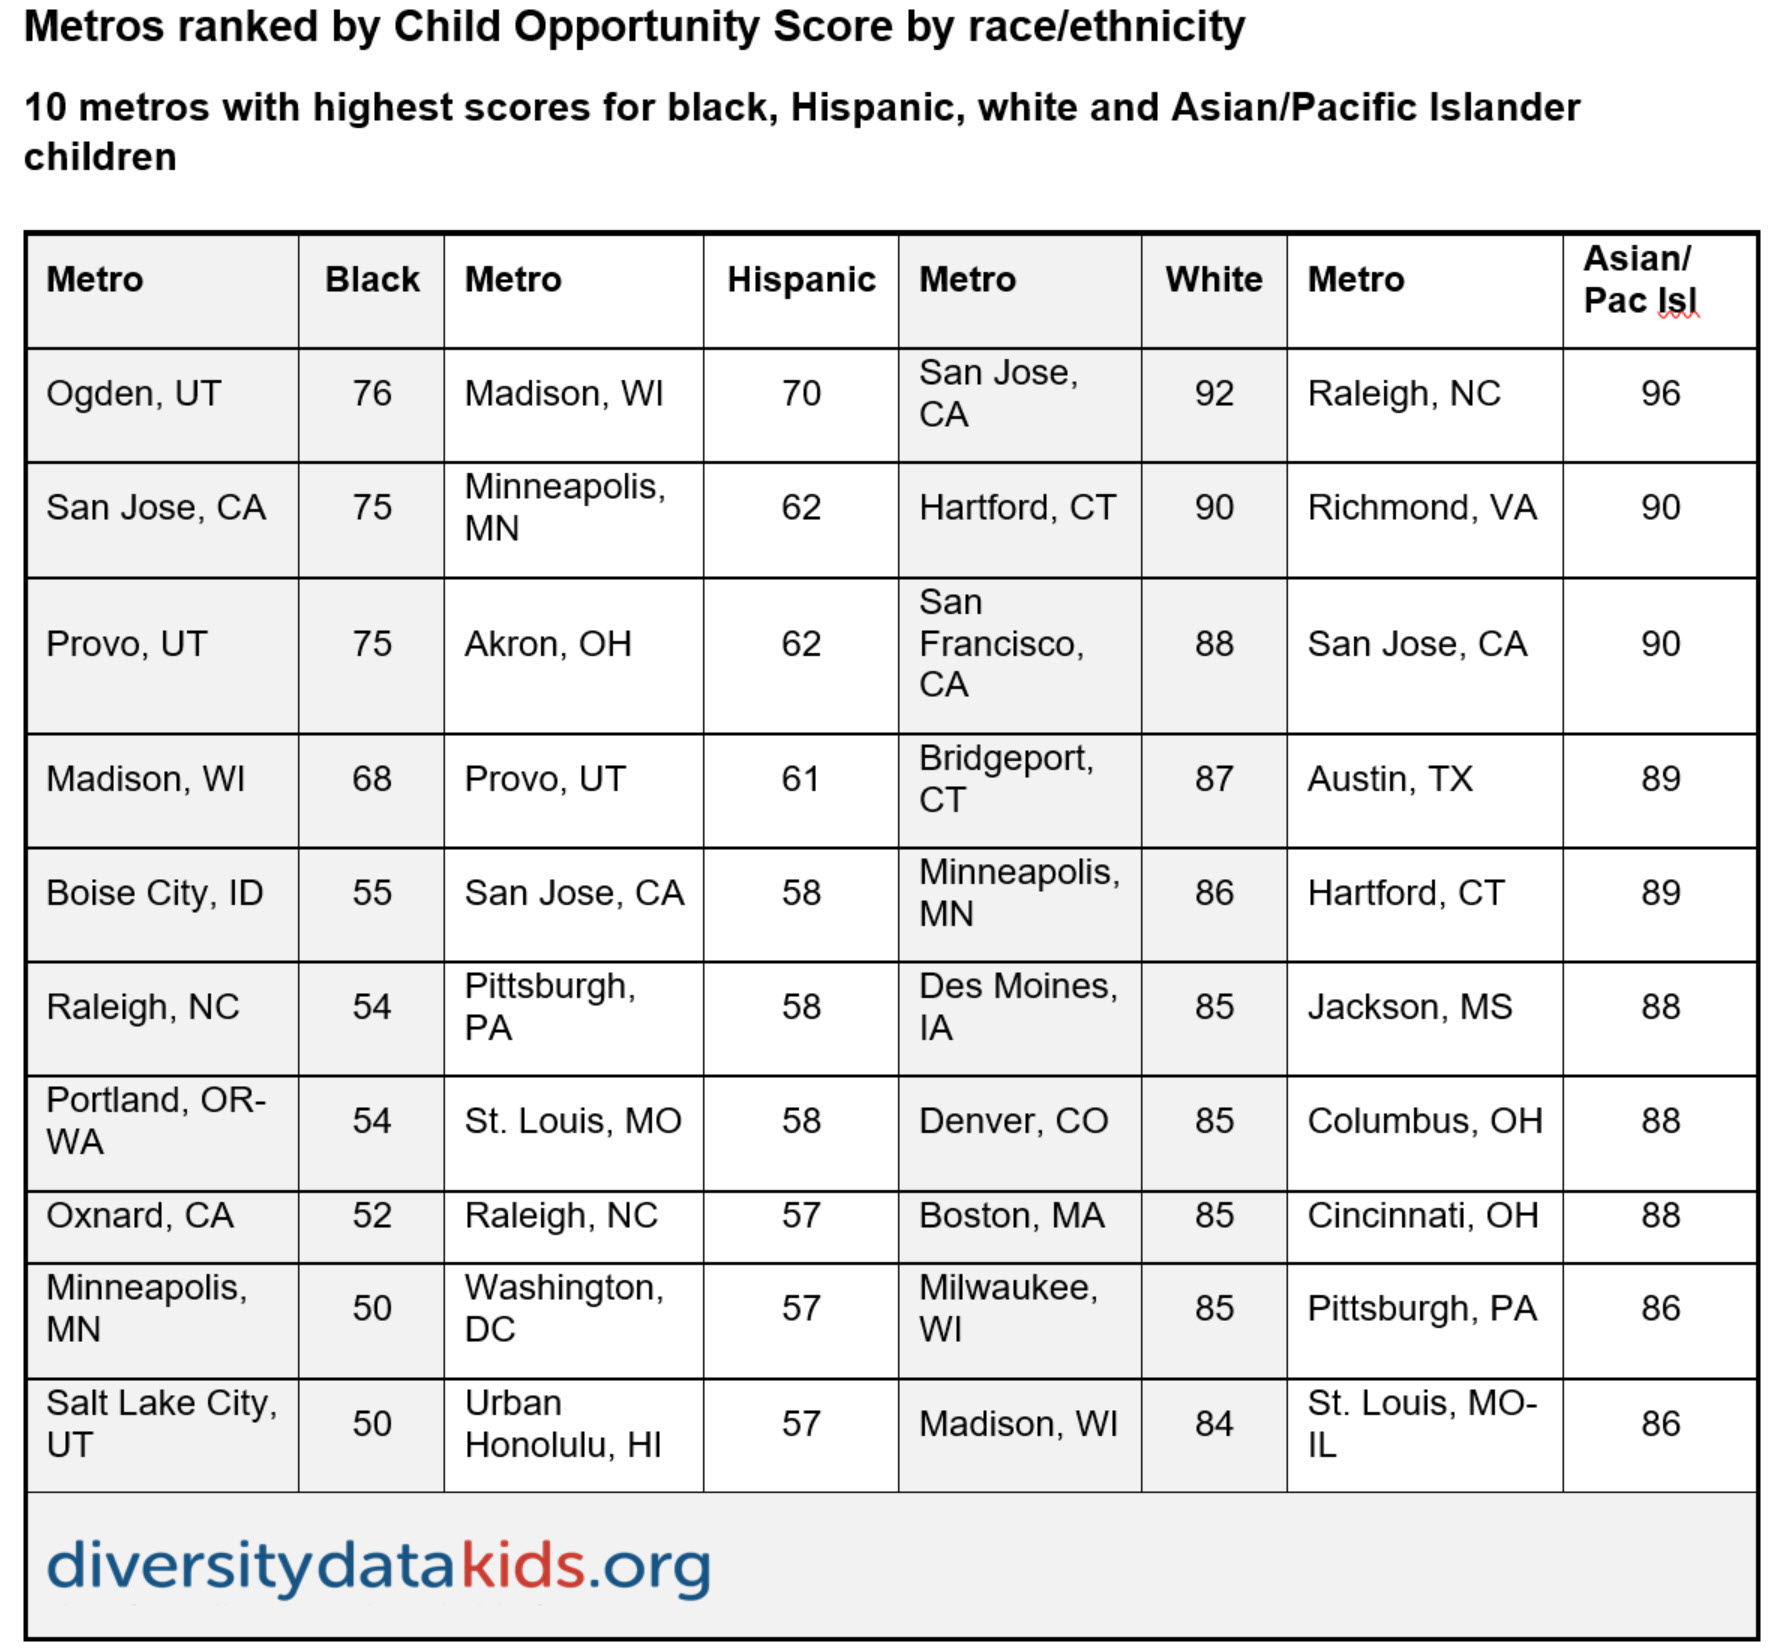 table showing highest child opportunity scores by race and ethnicity